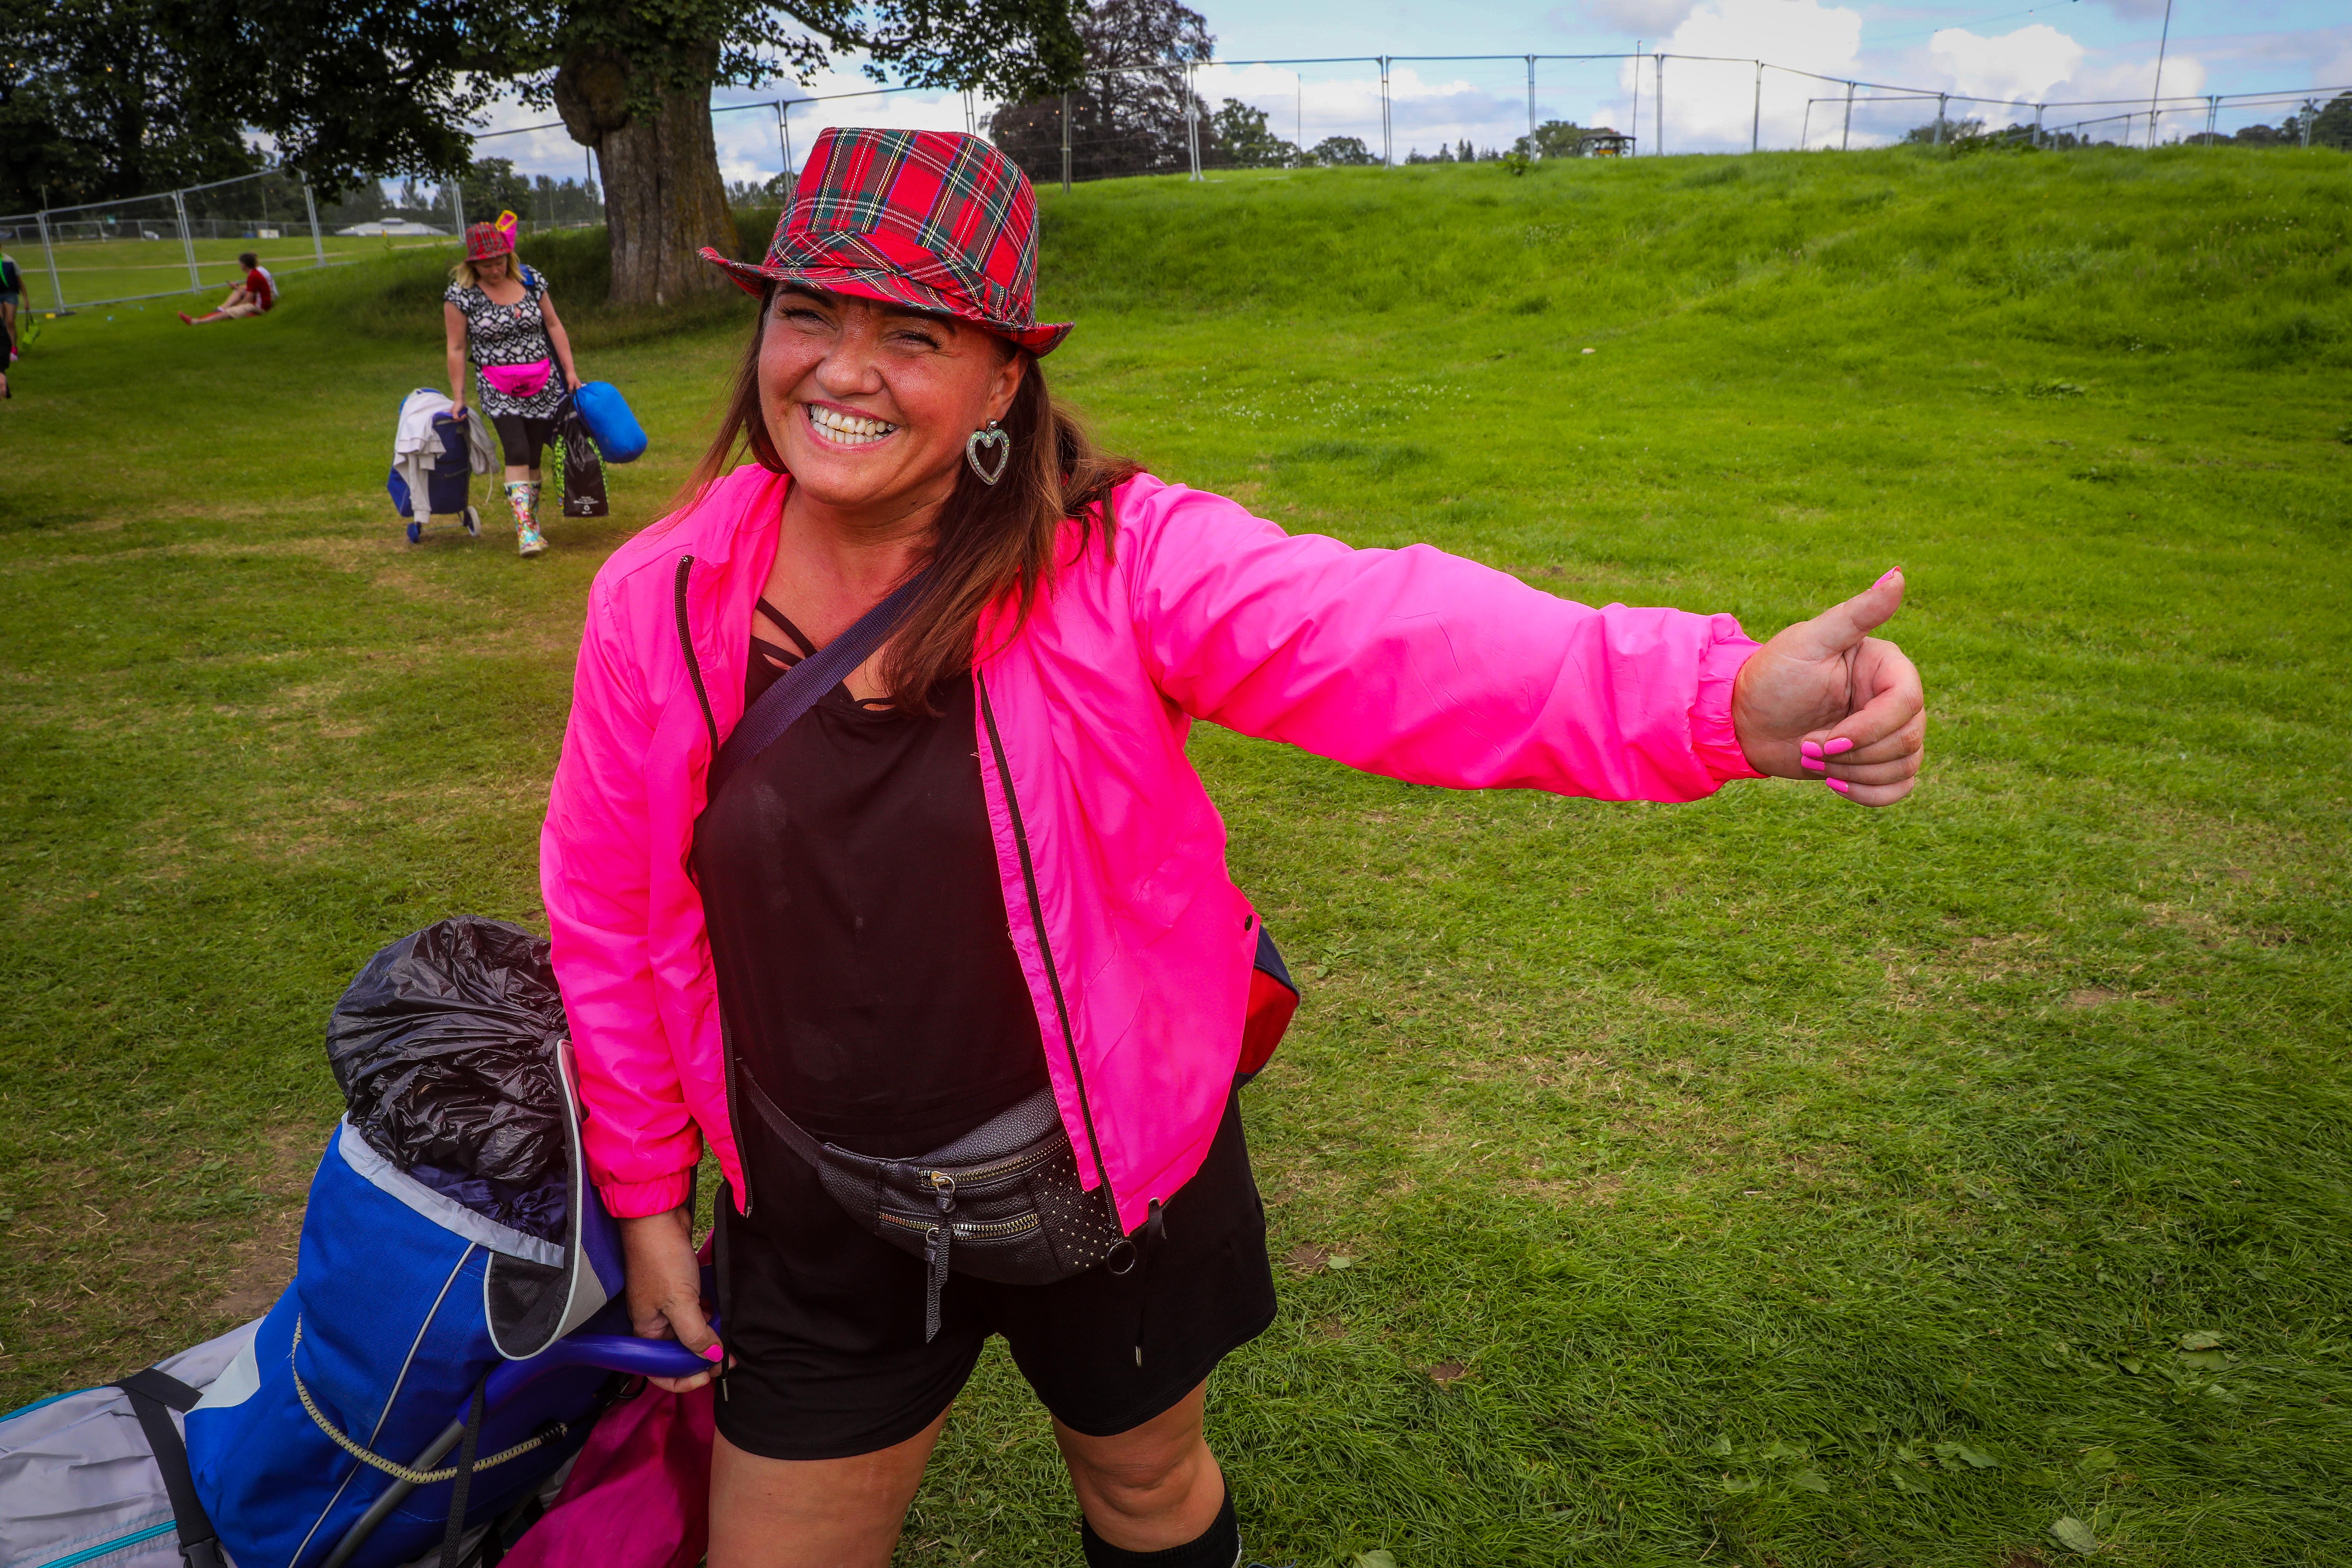 Campers start to arrive for a weekend of music at Rewind Festival 2019 at Scone Palace, Perth. Tracey McCall (45) from Clydebank. Pictures by Steve Brown.